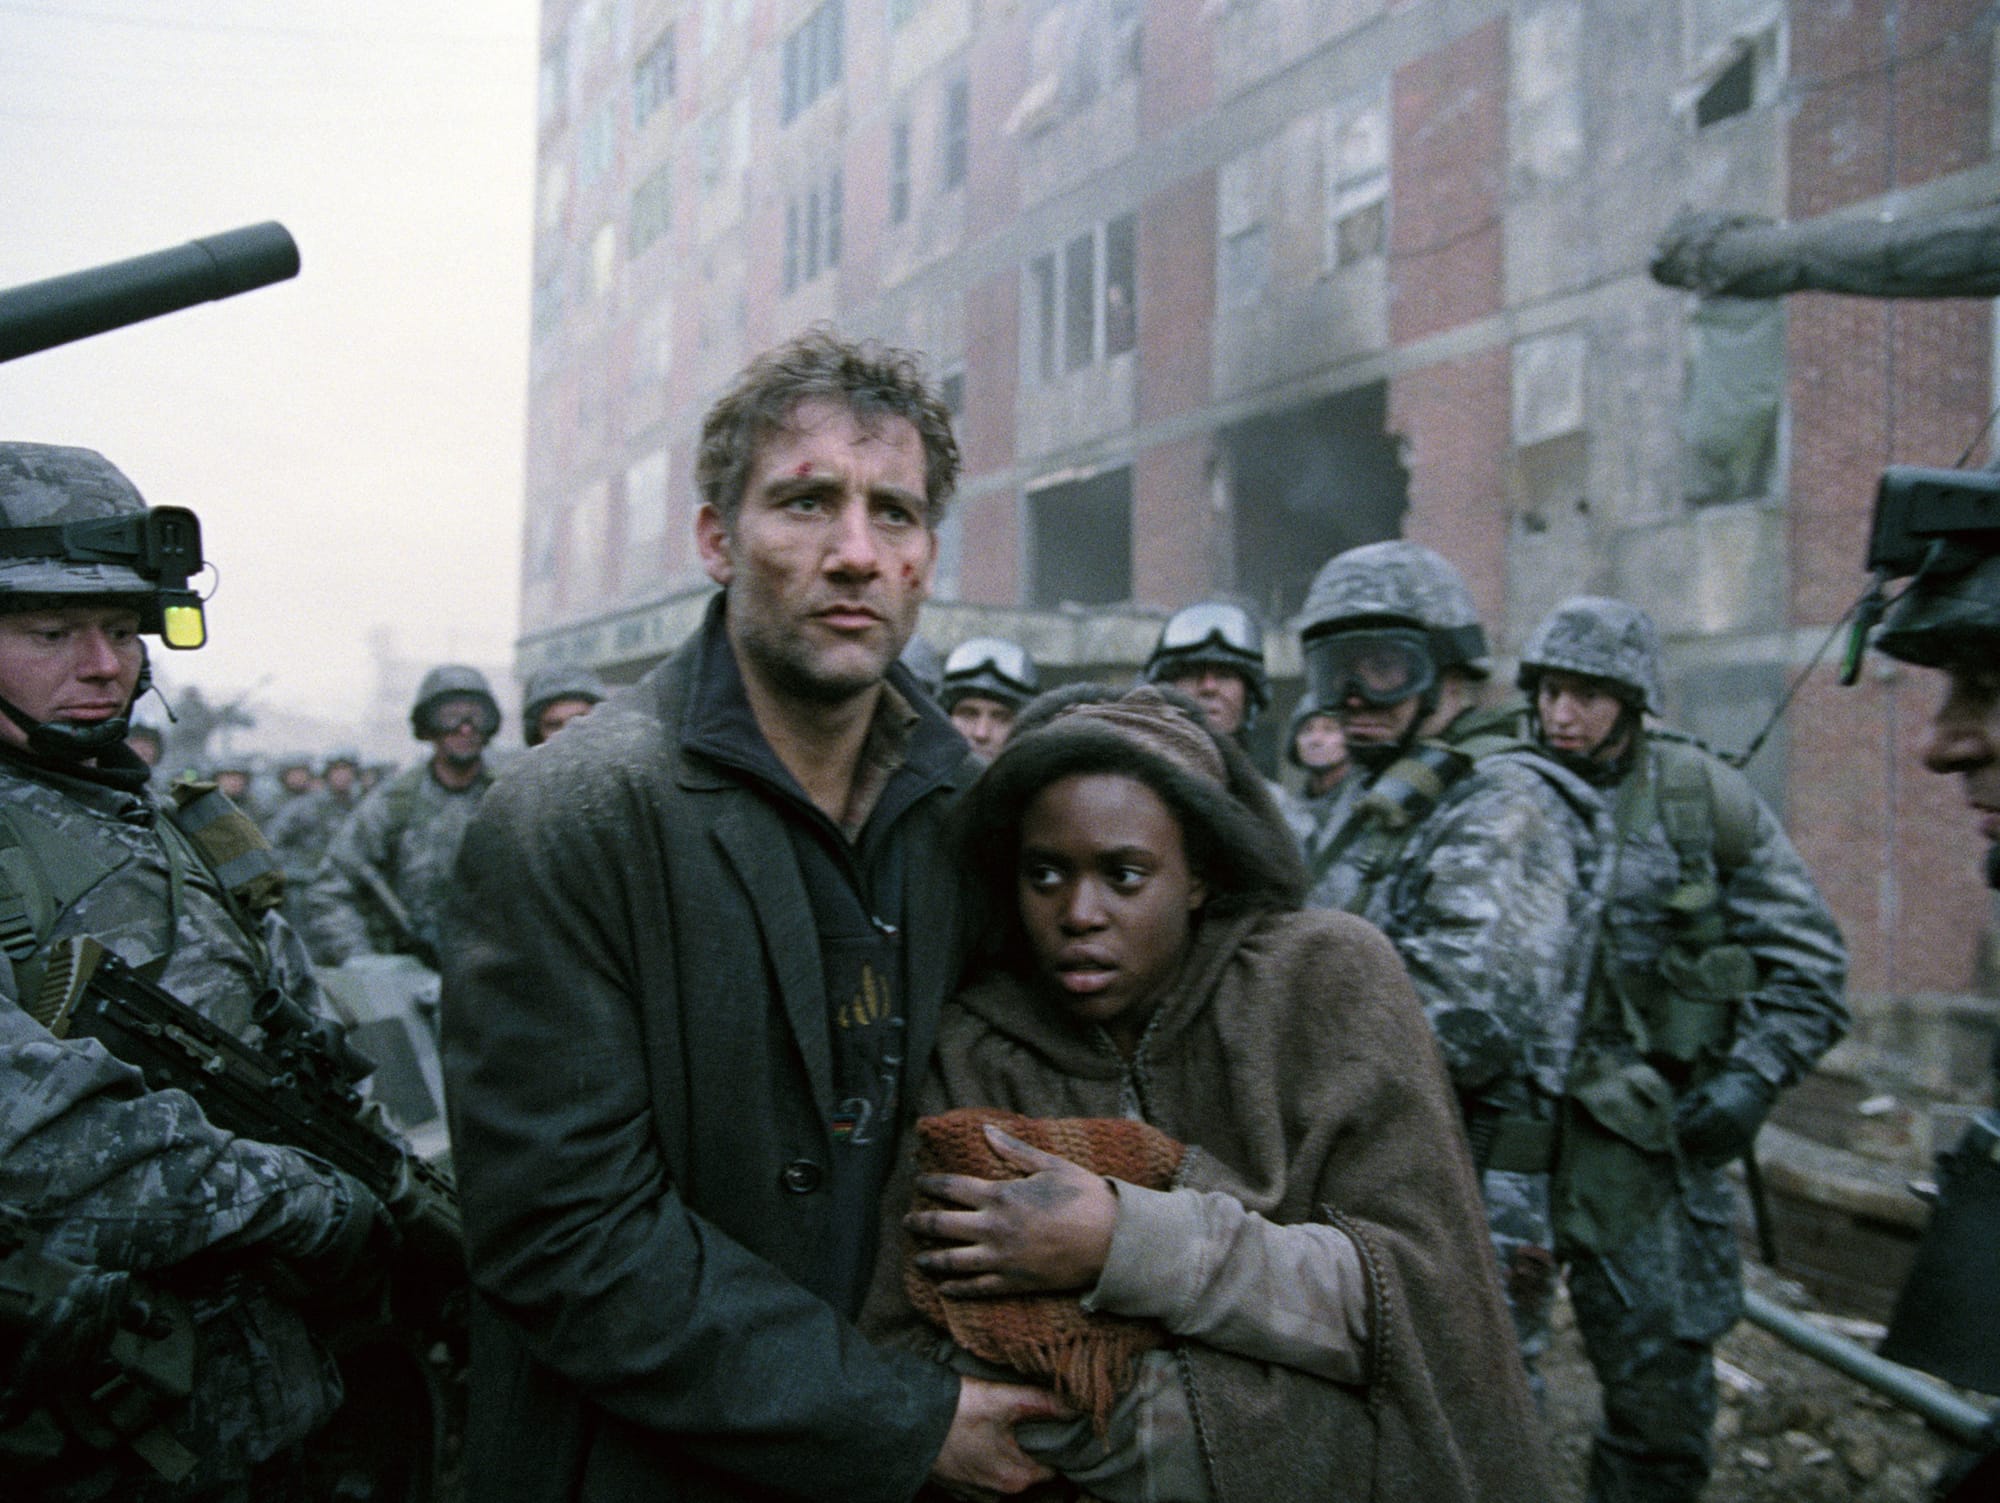 A Movie Review Of Alfonso Cuarón's Children Of Men